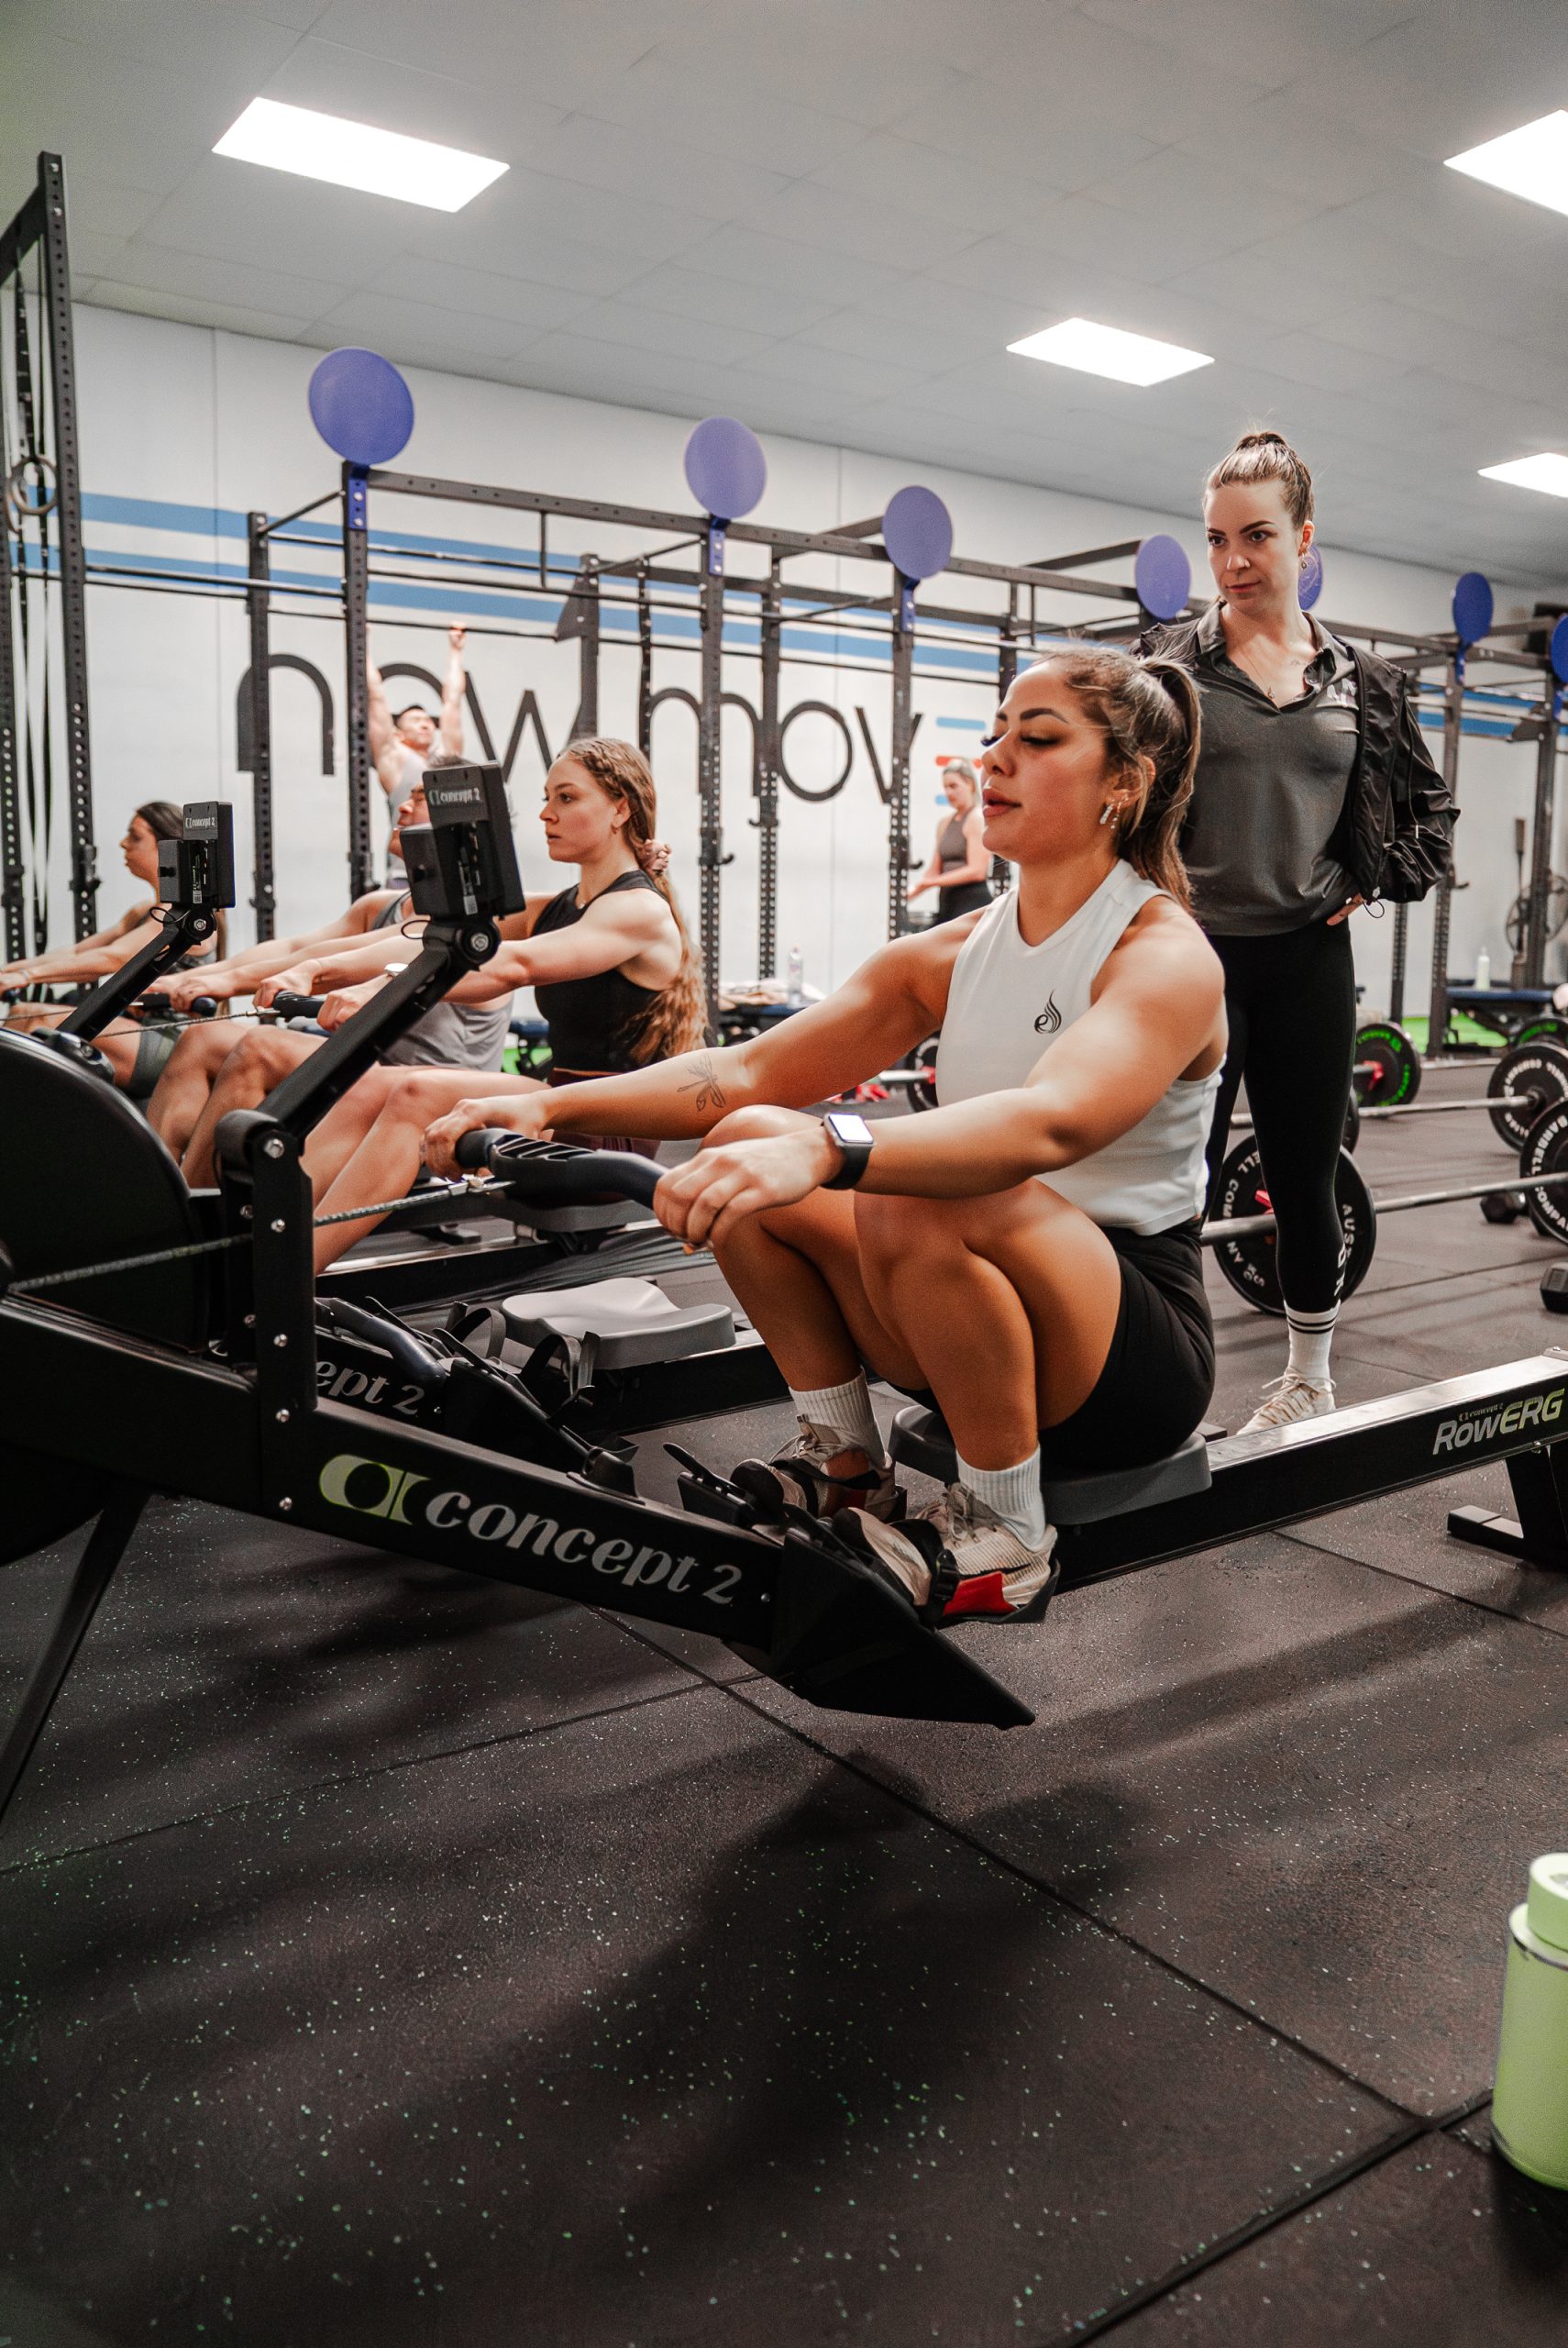 Explore 44 weekly classes in our fitness jungle, featuring lift classes, strength & conditioning, and HIIT. Our well-equipped facility includes barbells, dumbbells, kettlebells, wall balls, slam balls, Concept 2 rowers, ski ergs, ropes, sleds, and more.